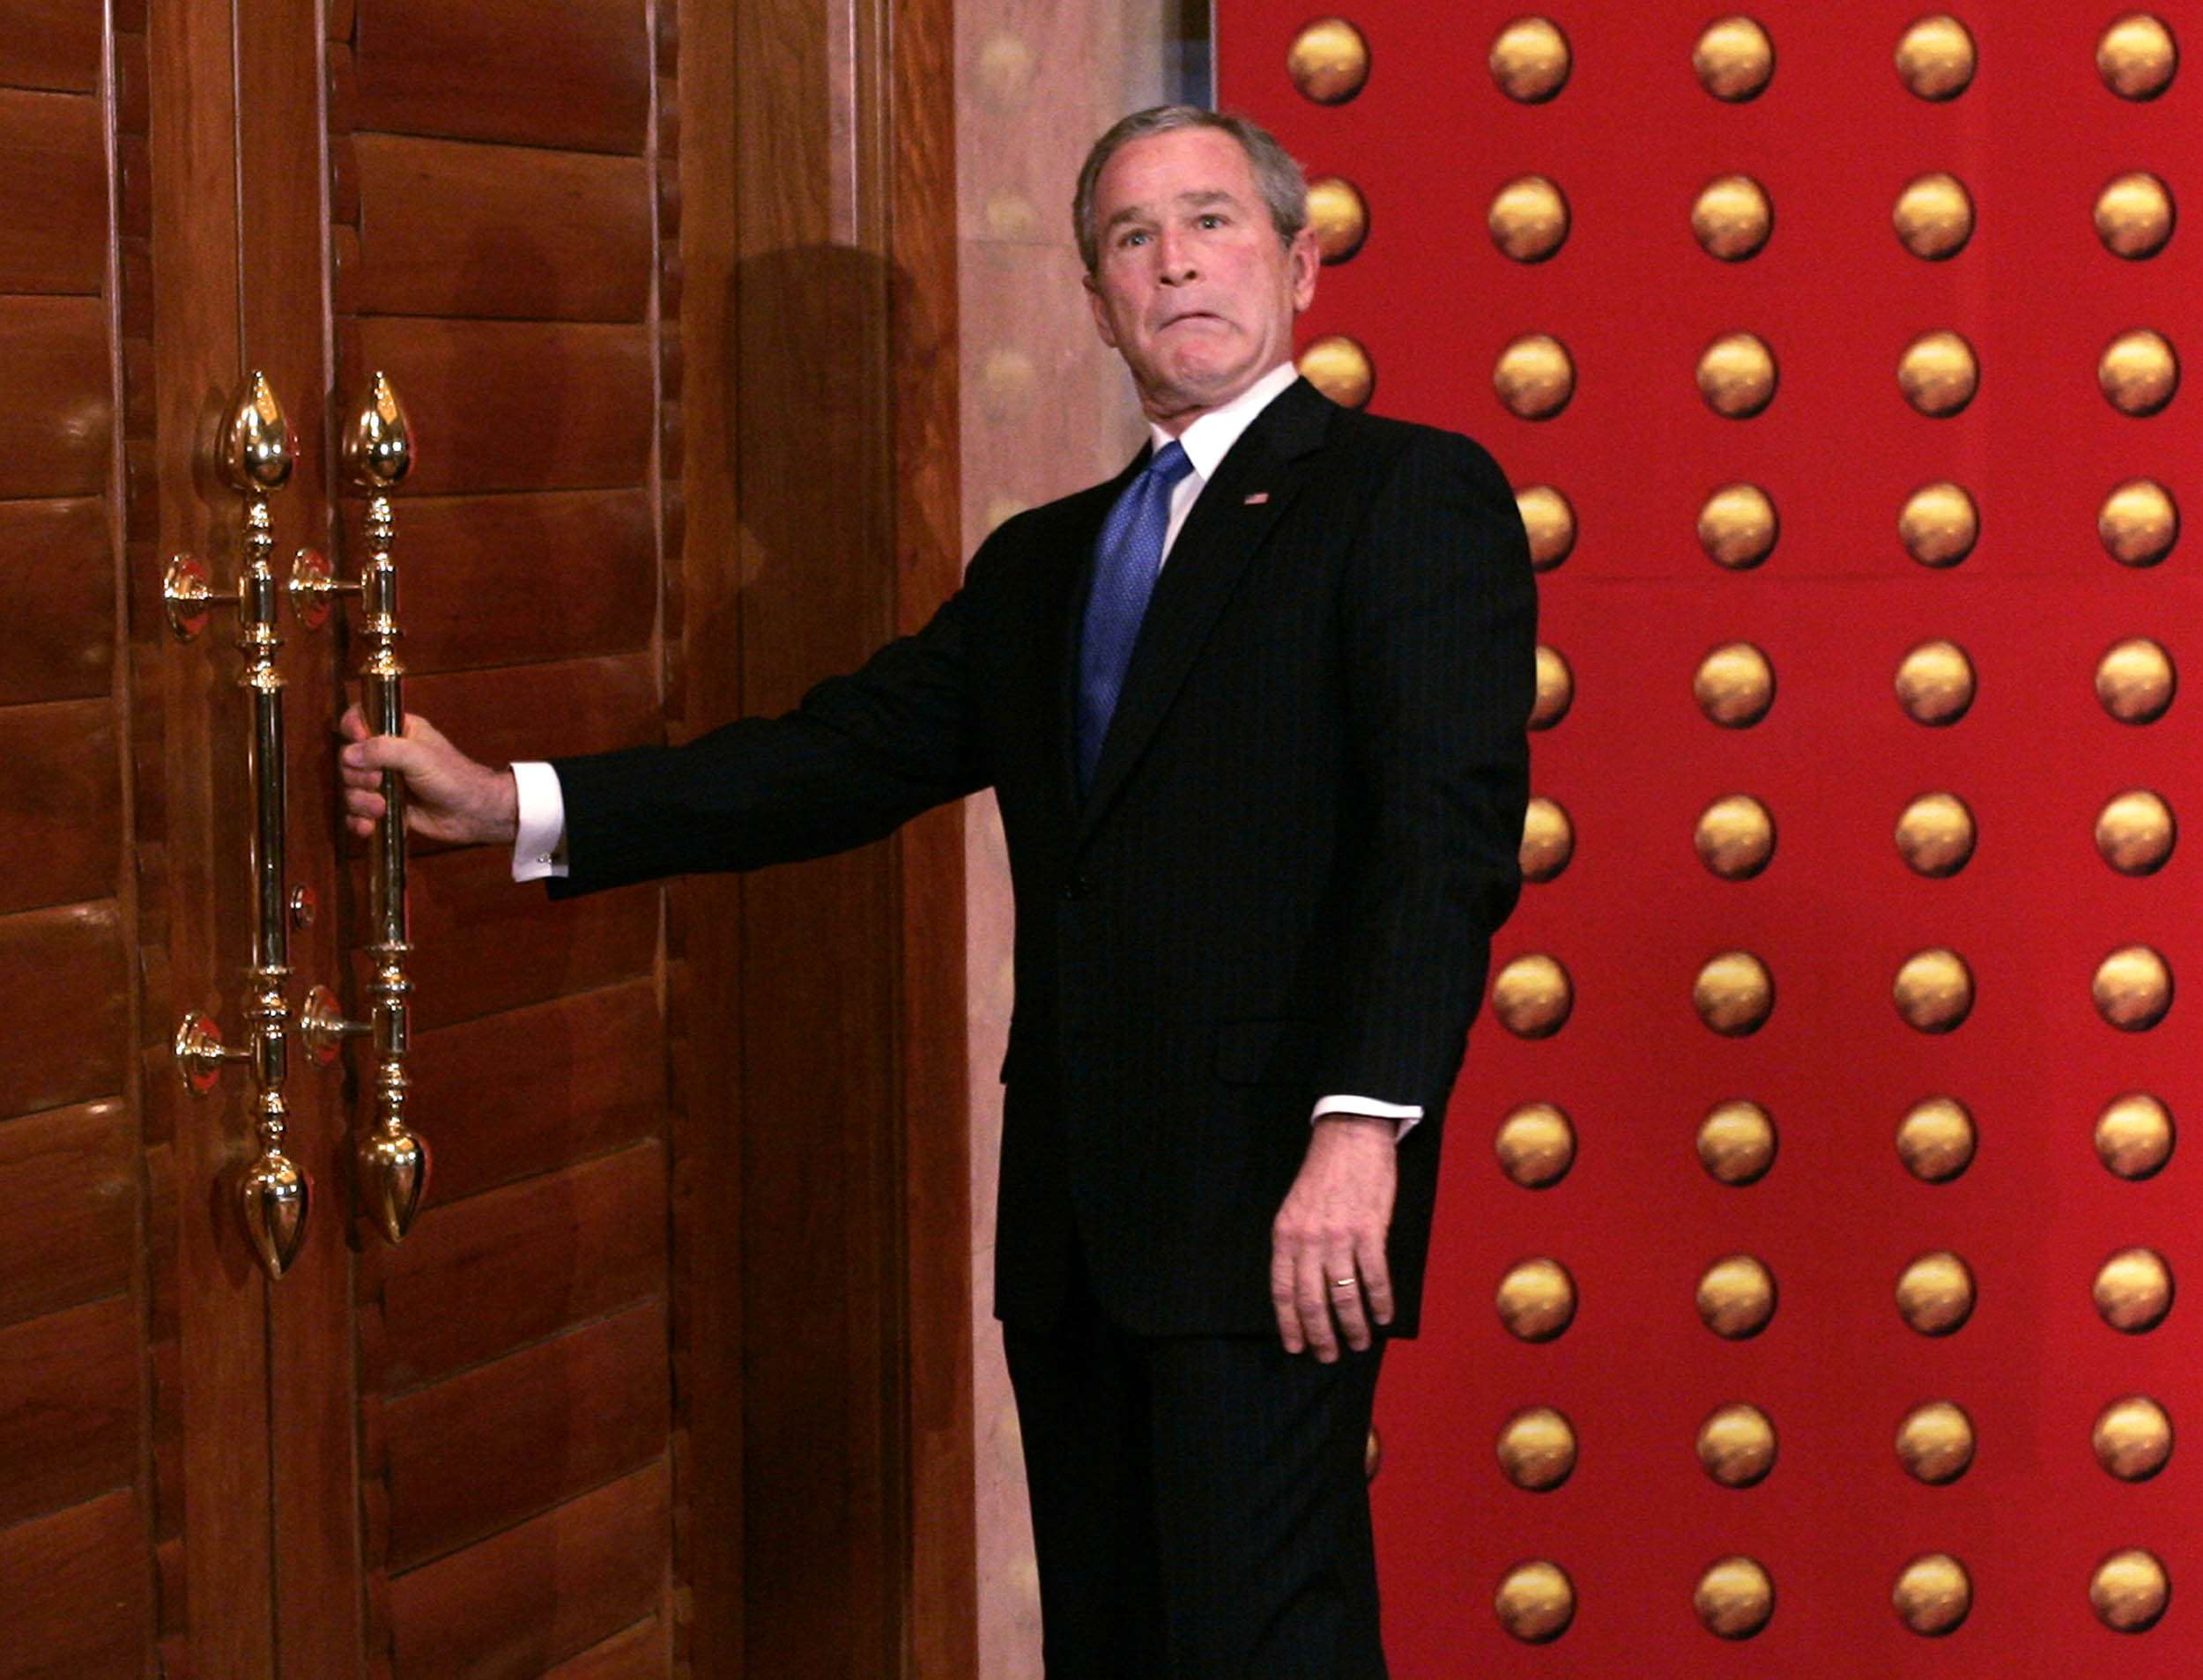 George W. Bush jokingly makes a face as he tries to open a locked door as he leaves a press conference in Beijing in 2005. File photo: AP